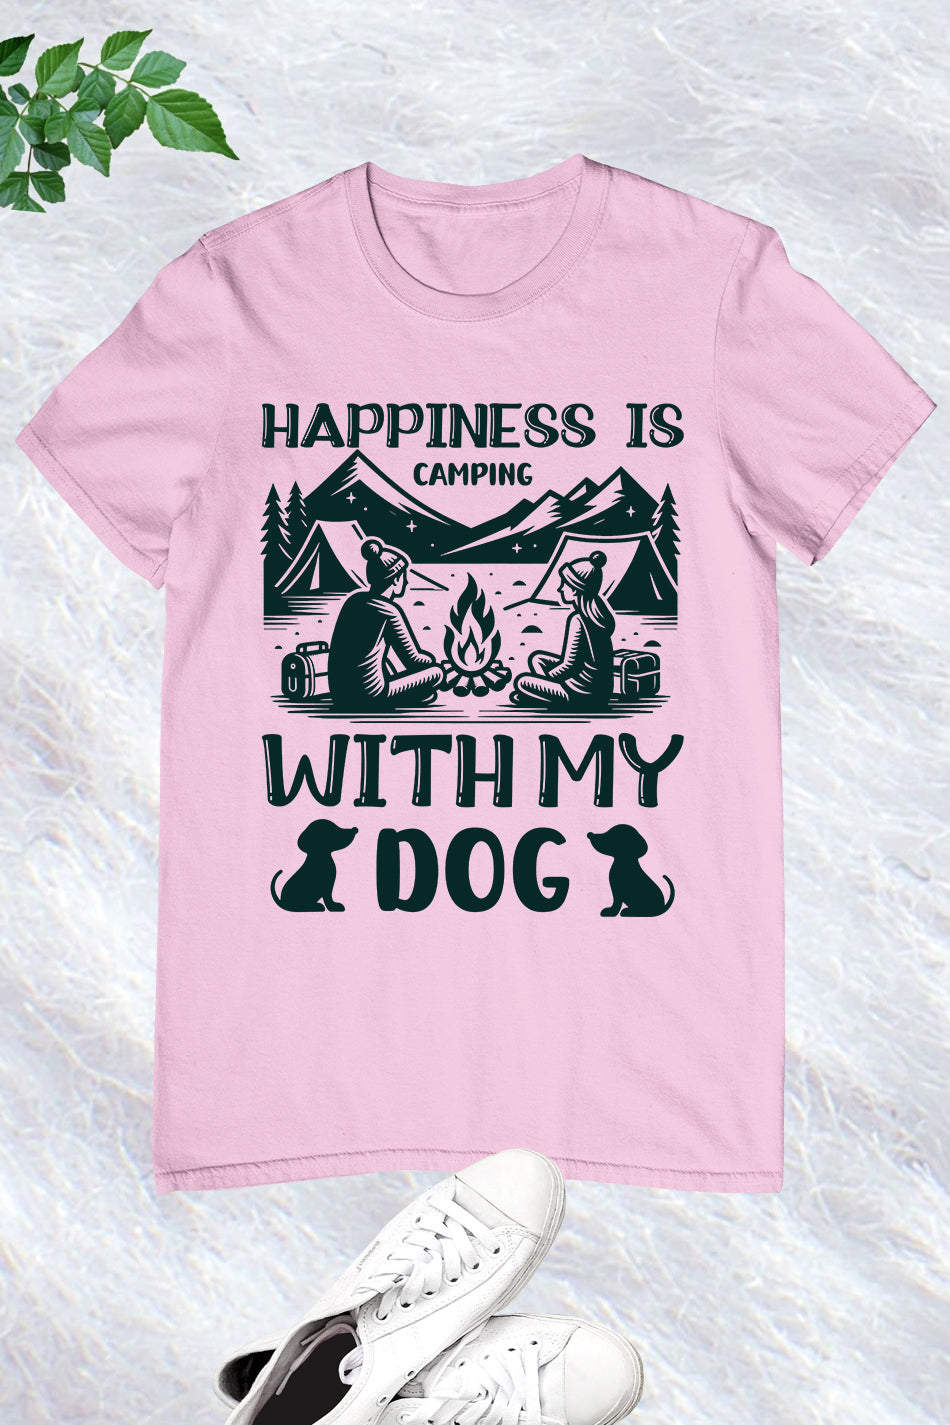 Happiness is Camping with My Dog Shirt